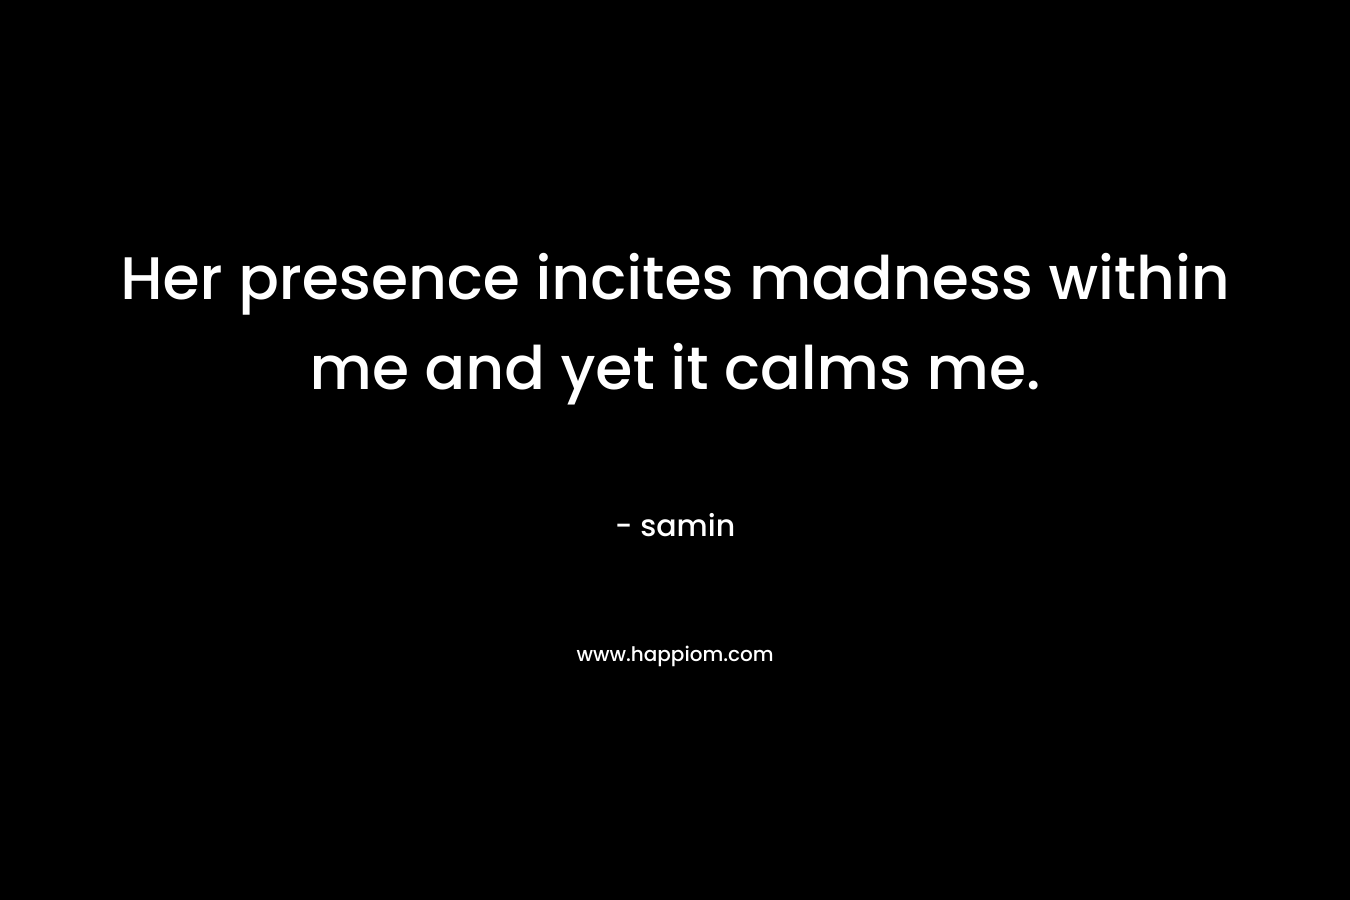 Her presence incites madness within me and yet it calms me.